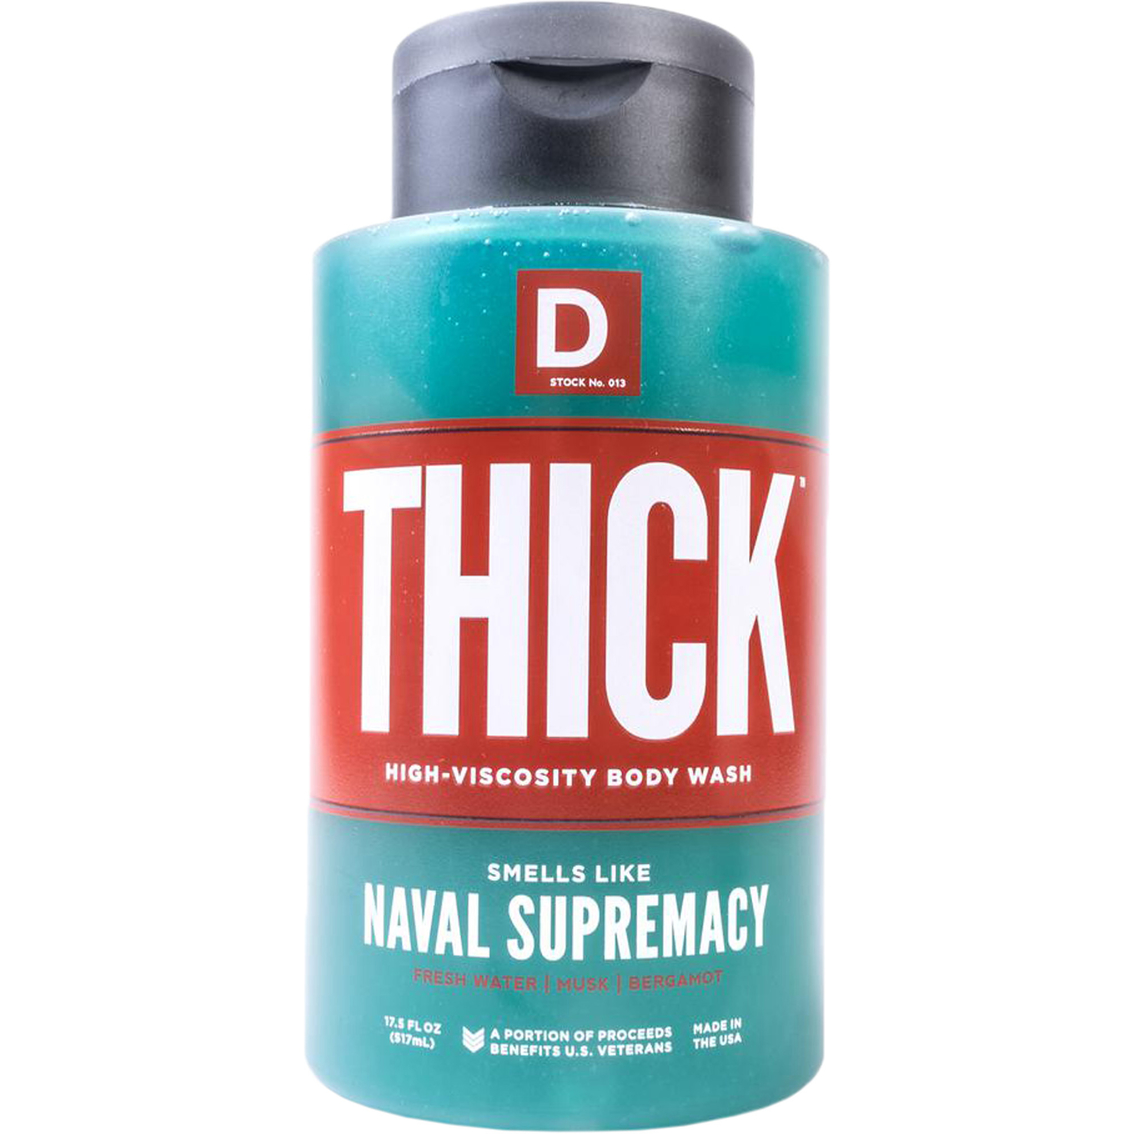 Duke Cannon Thick Liquid Shower Soap, Naval Supremacy - Image 1 of 3